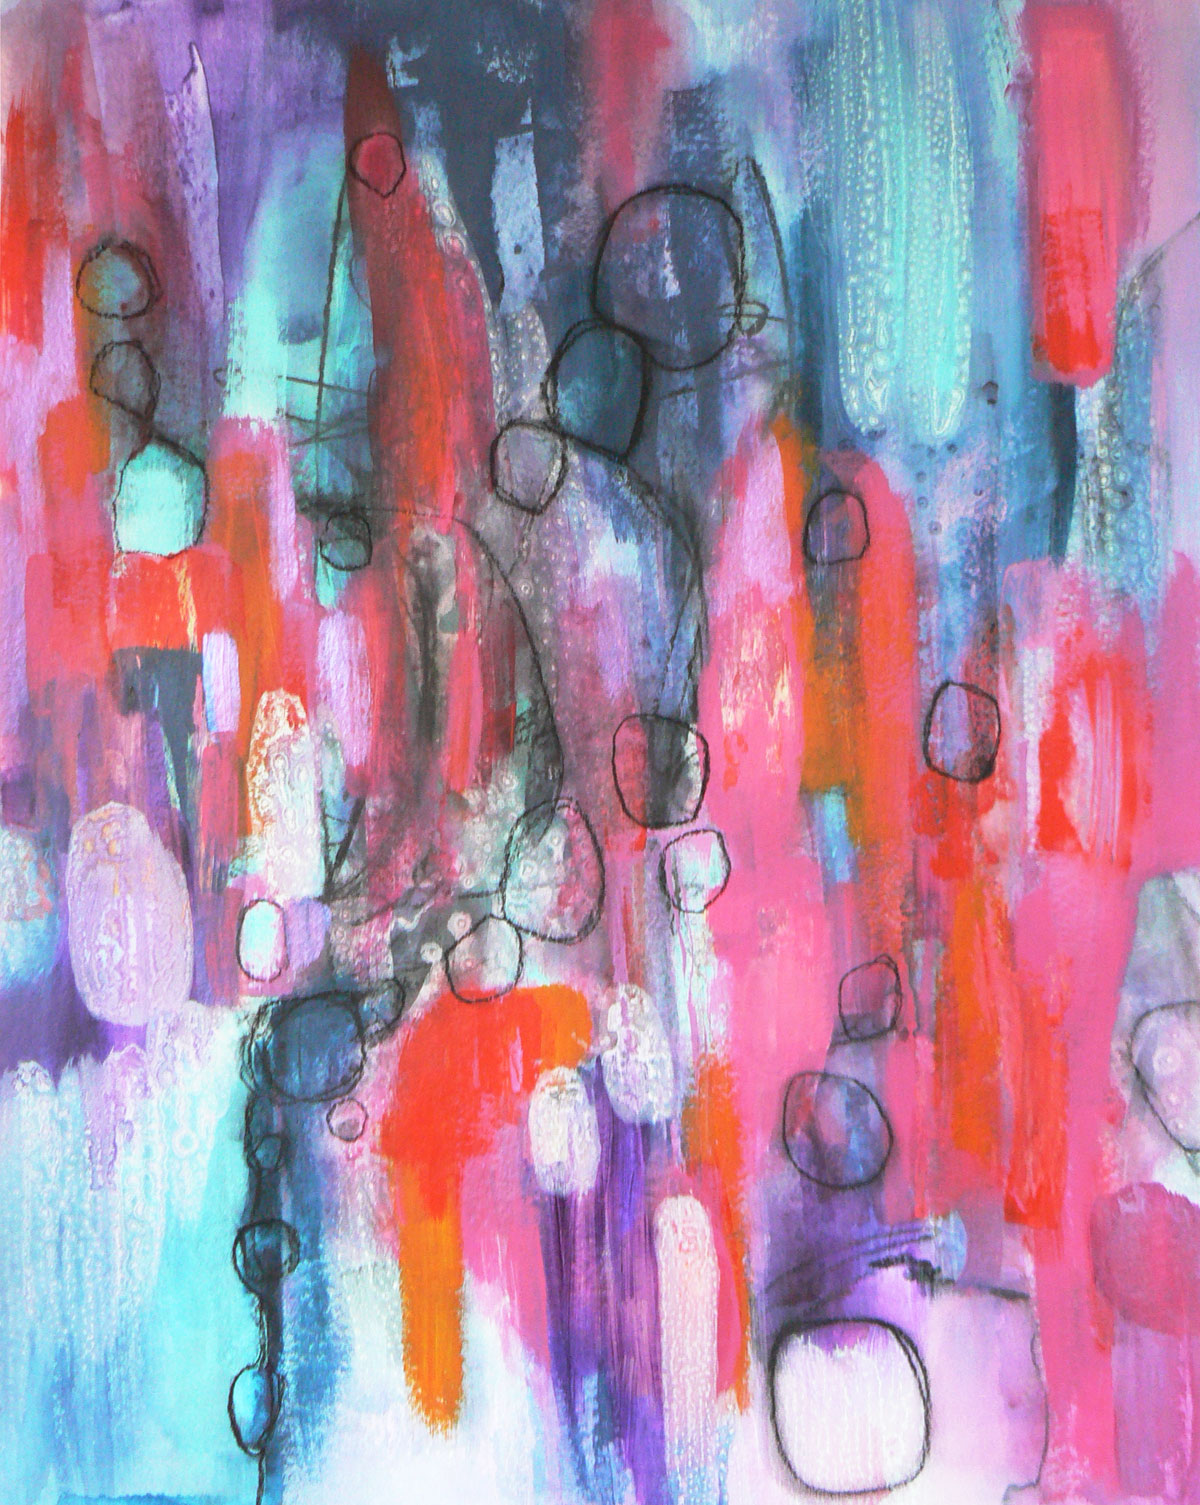 Sticks and stones, 2015 Acrylic painting by Carolynne Coulson